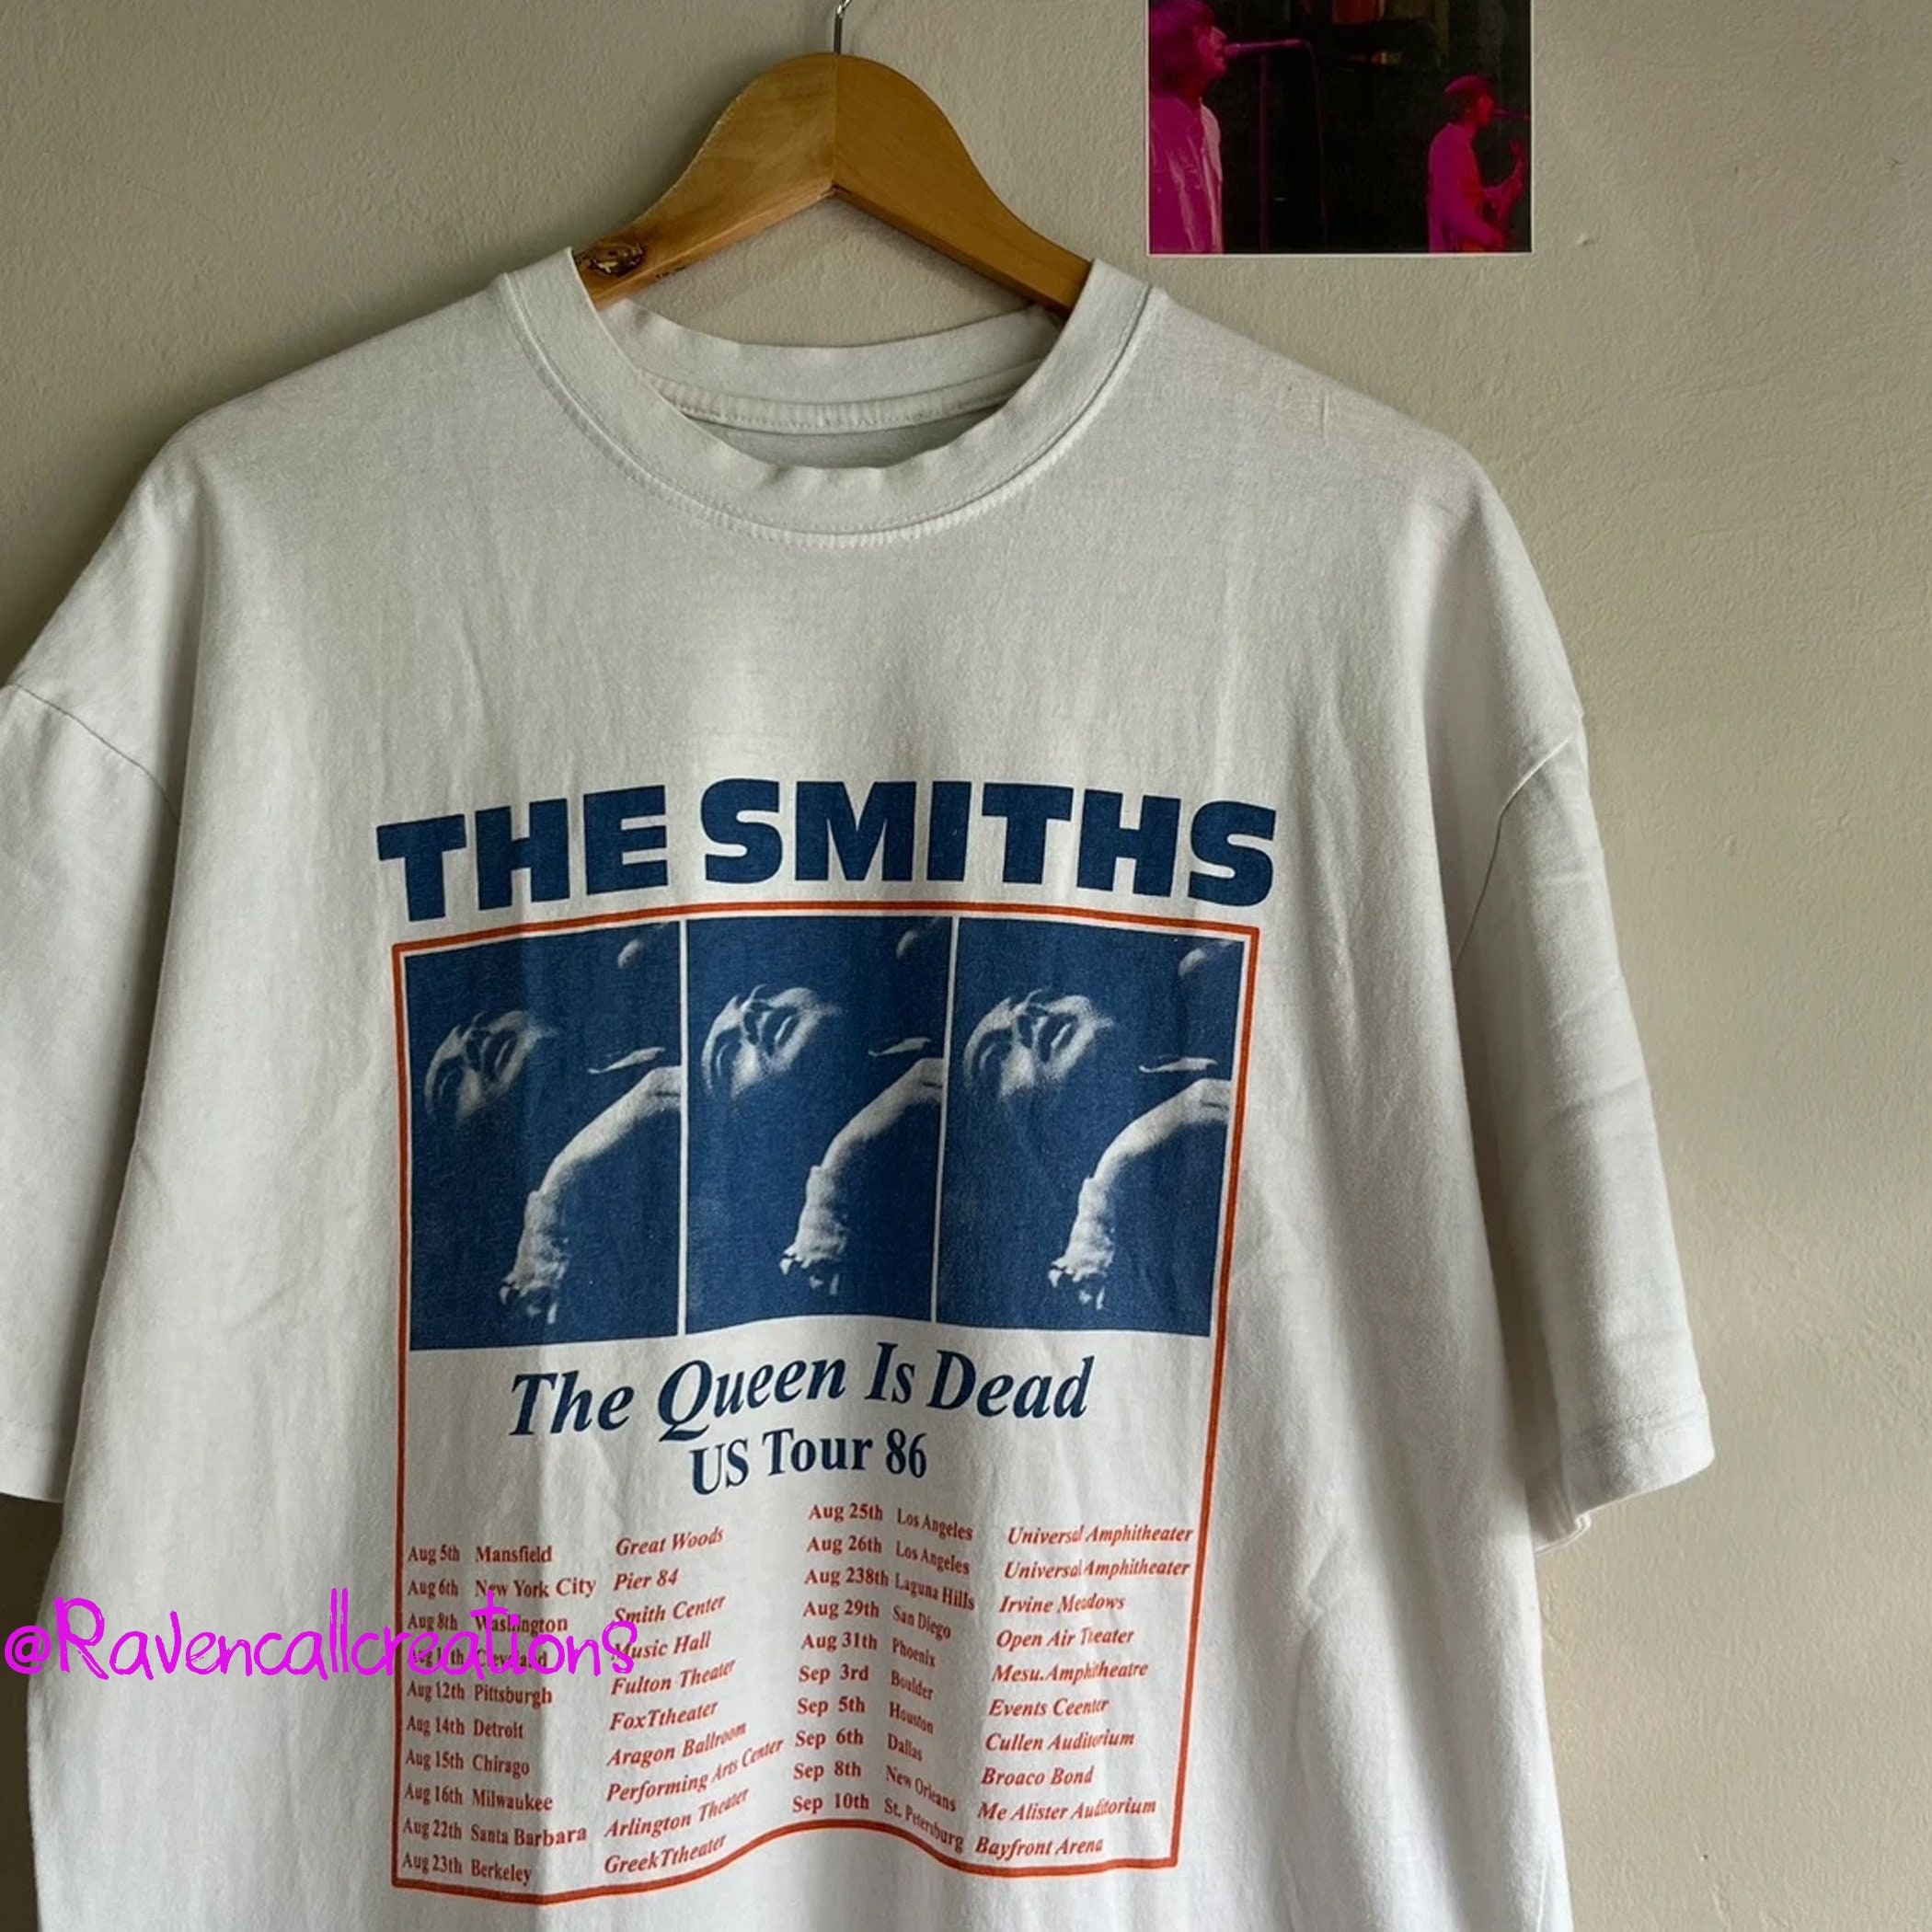 Discover The smiths shirt , Vintage 90s The Smiths The Queen Is Dead T-Shirt, The Smiths US tour 86 rock band tour concert unisex t shirt